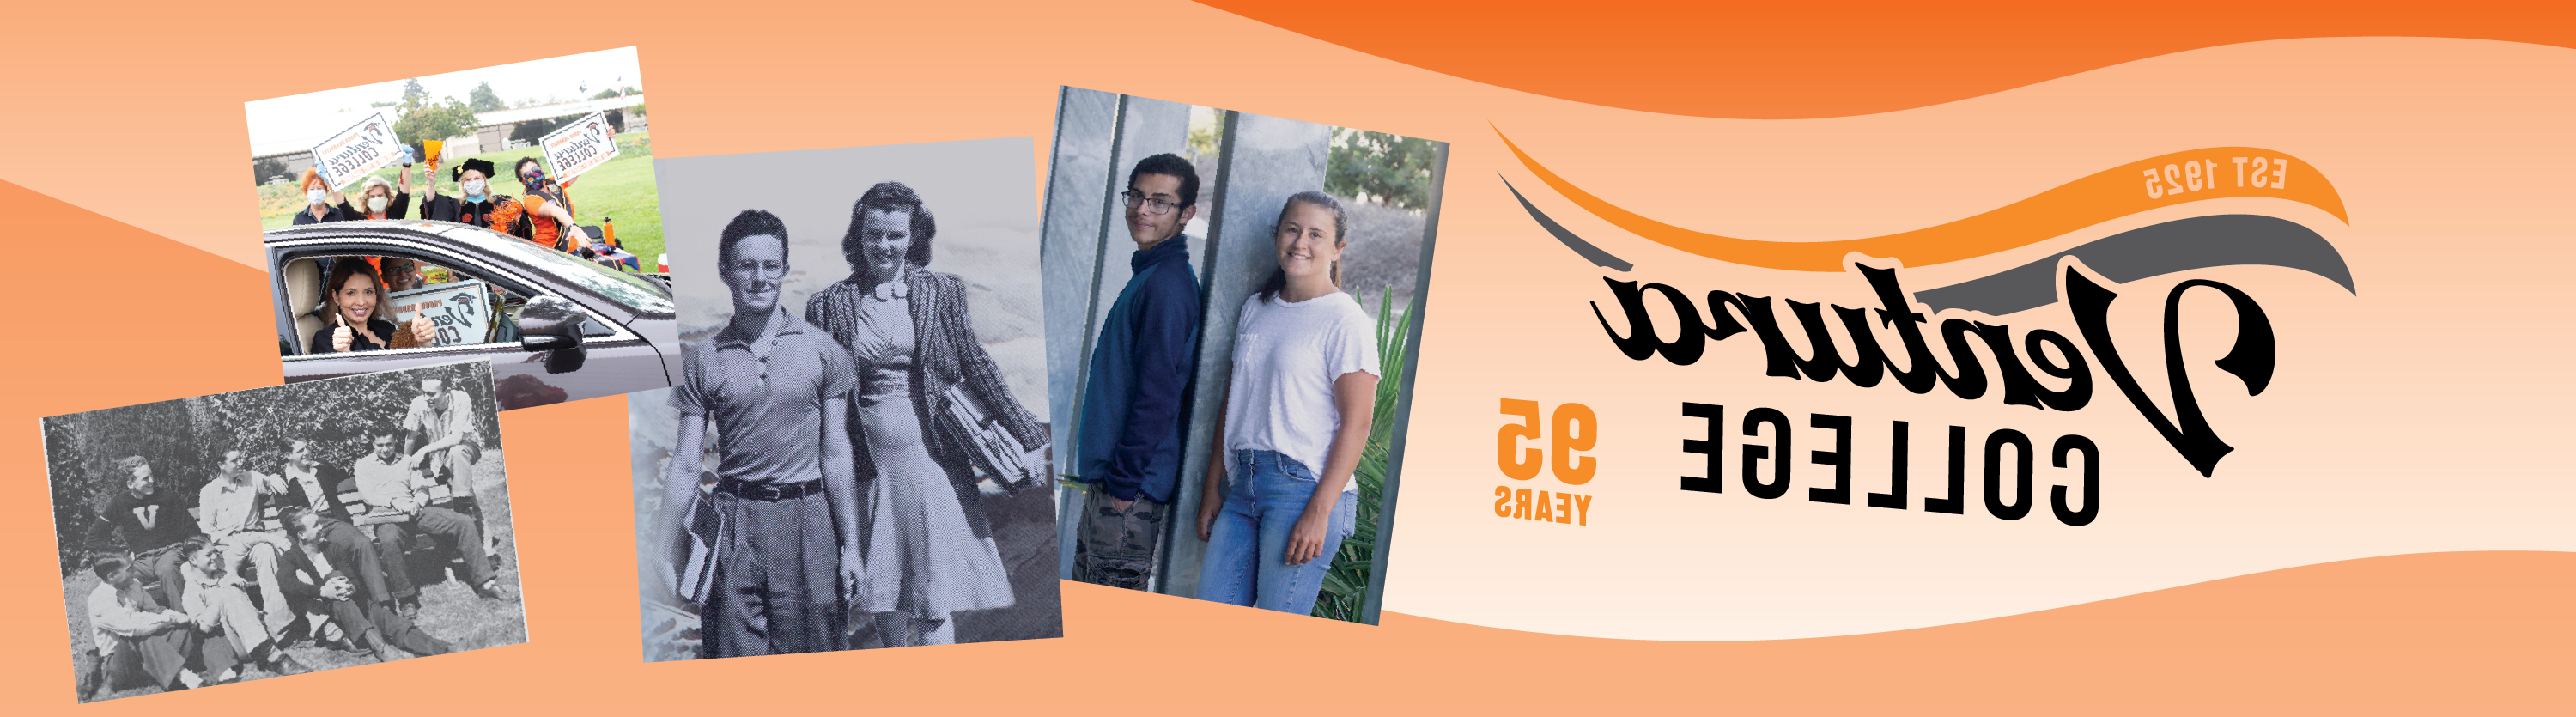 ventura college logo with historical photos of students